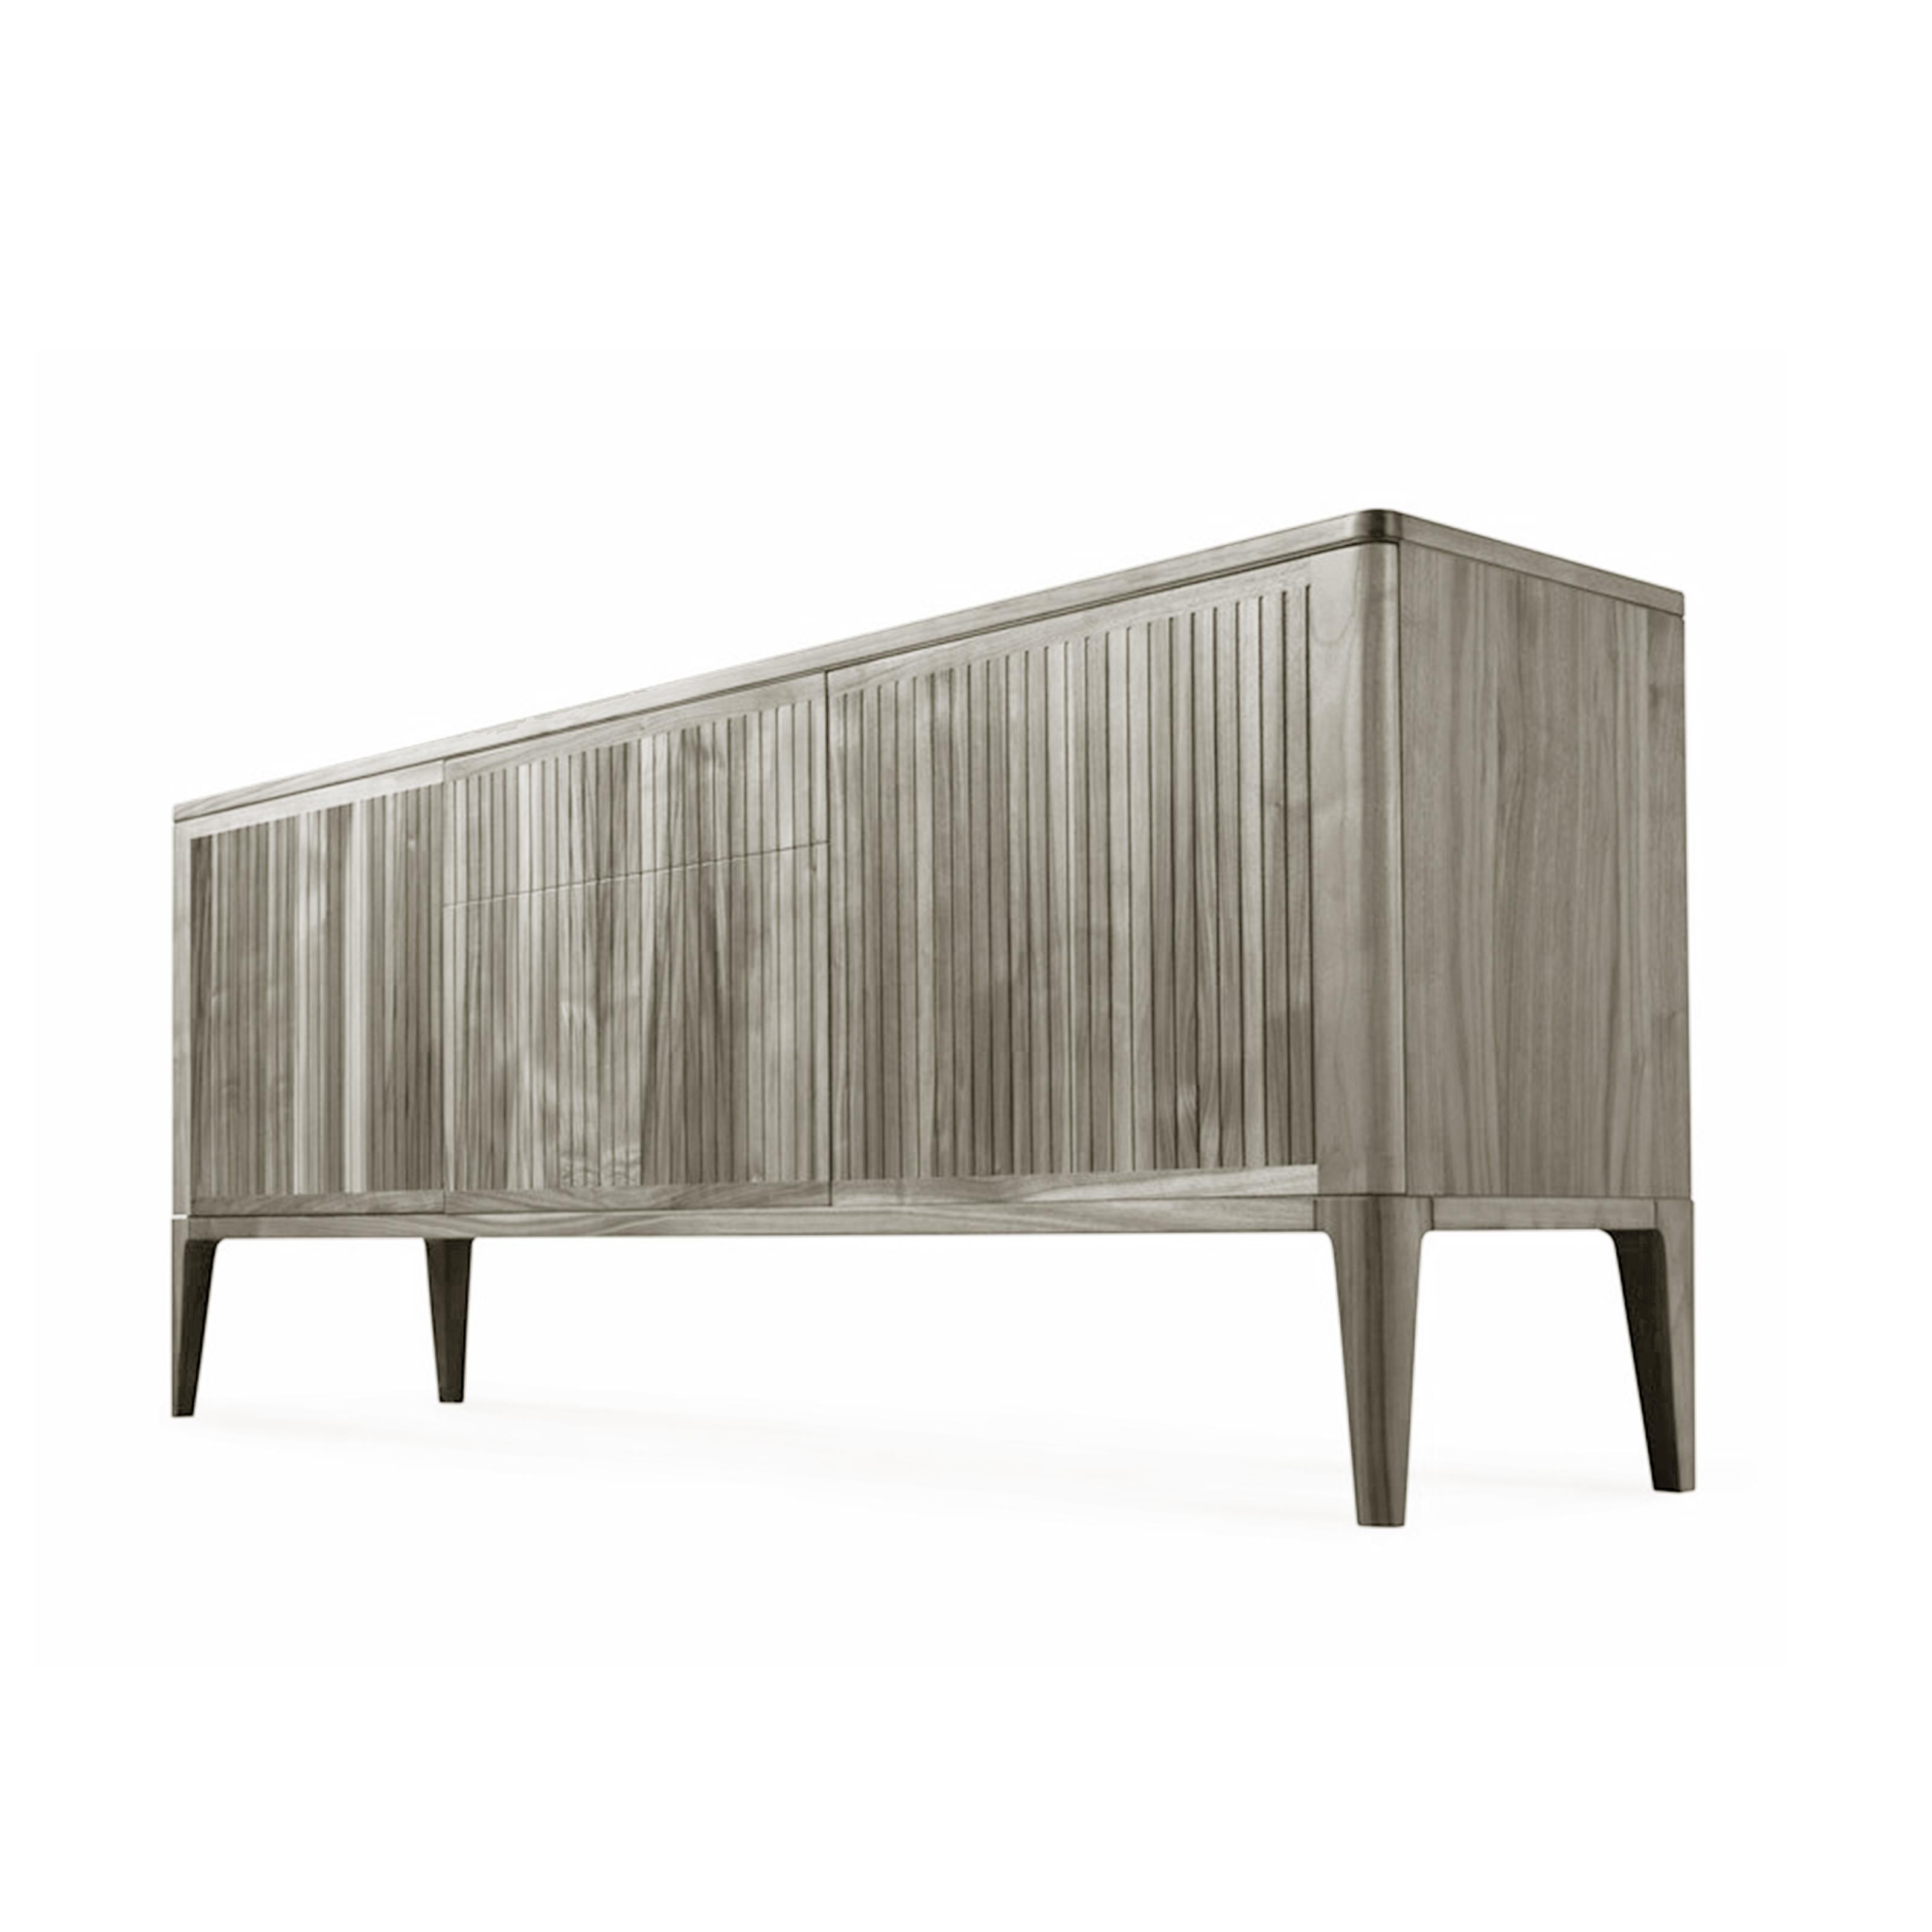 Its simplistic beauty, fine craftsmanship, and exceptional details compose a timeless piece made in Italy by expert hands. The sideboard front presents a linear composition result of our know-how in crafting solid walnut. It comes with two doors and